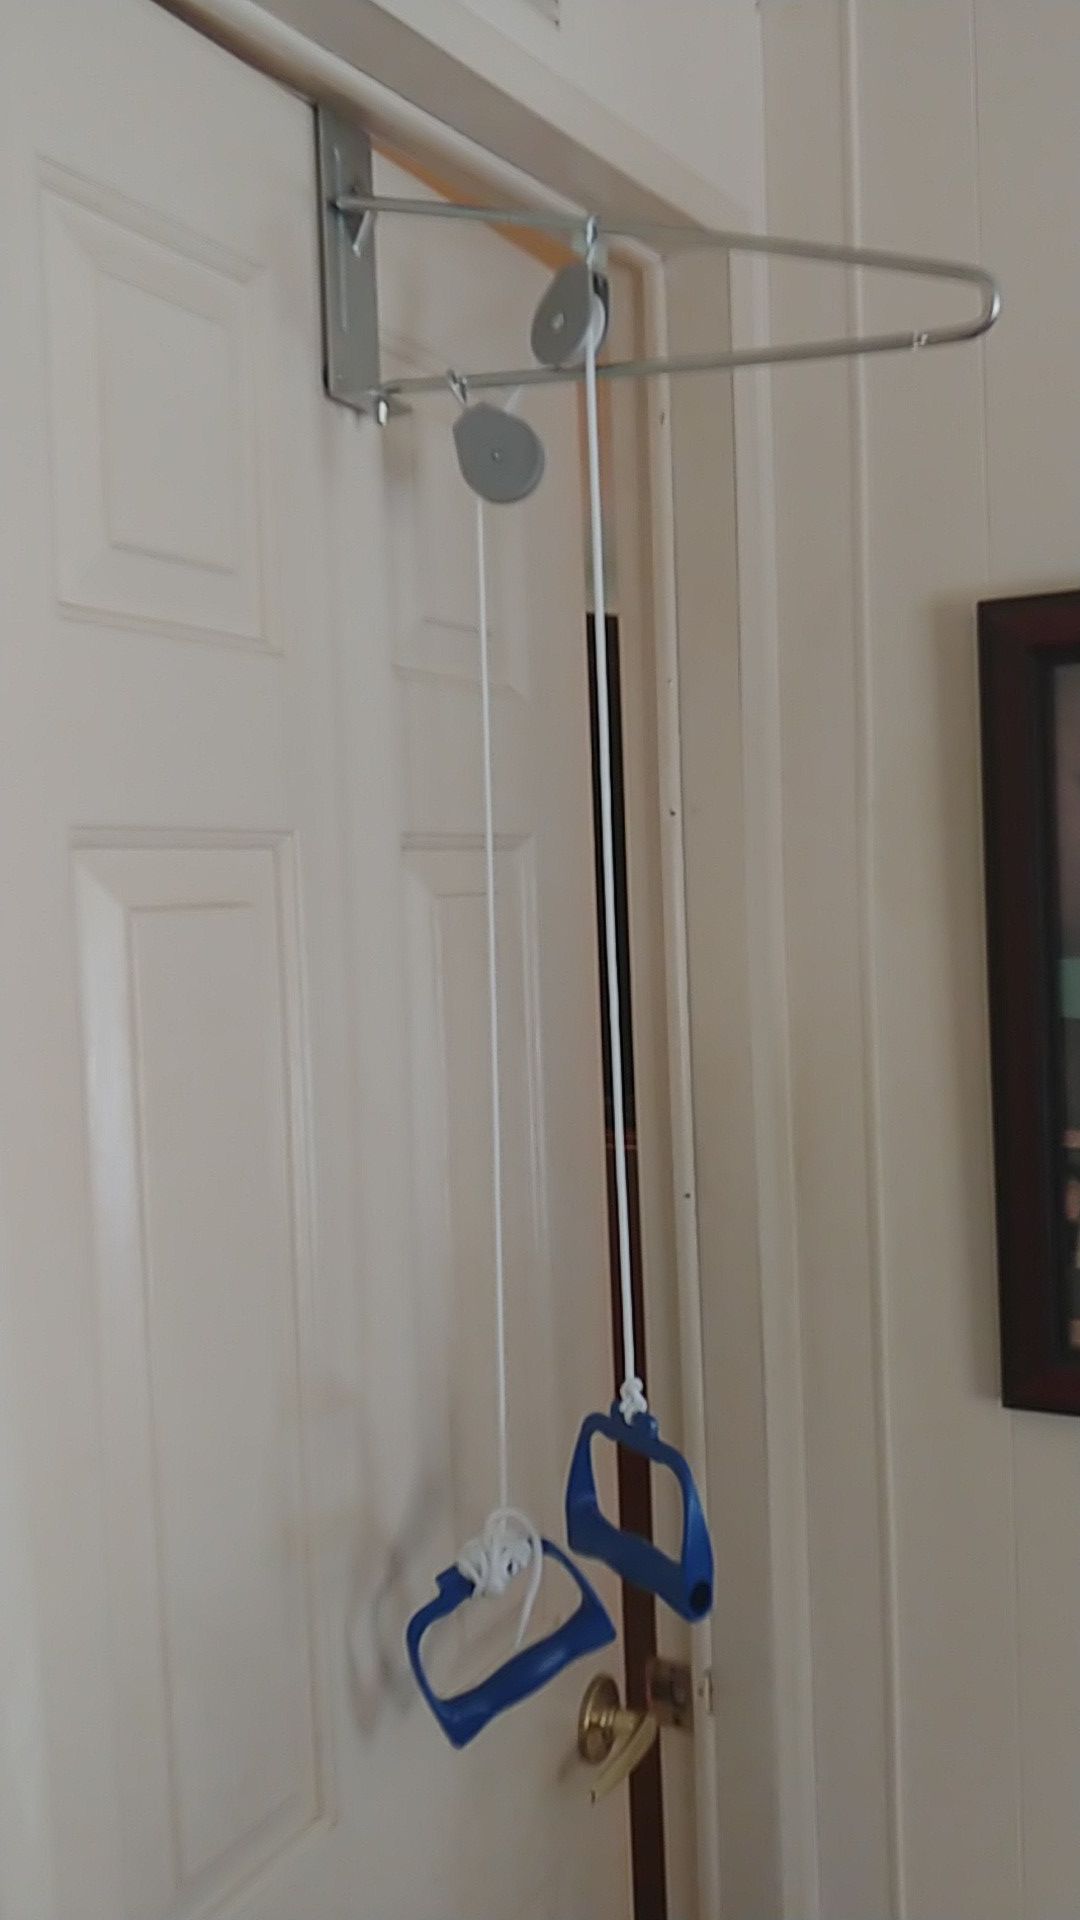 Exercise pulley used twice still have box